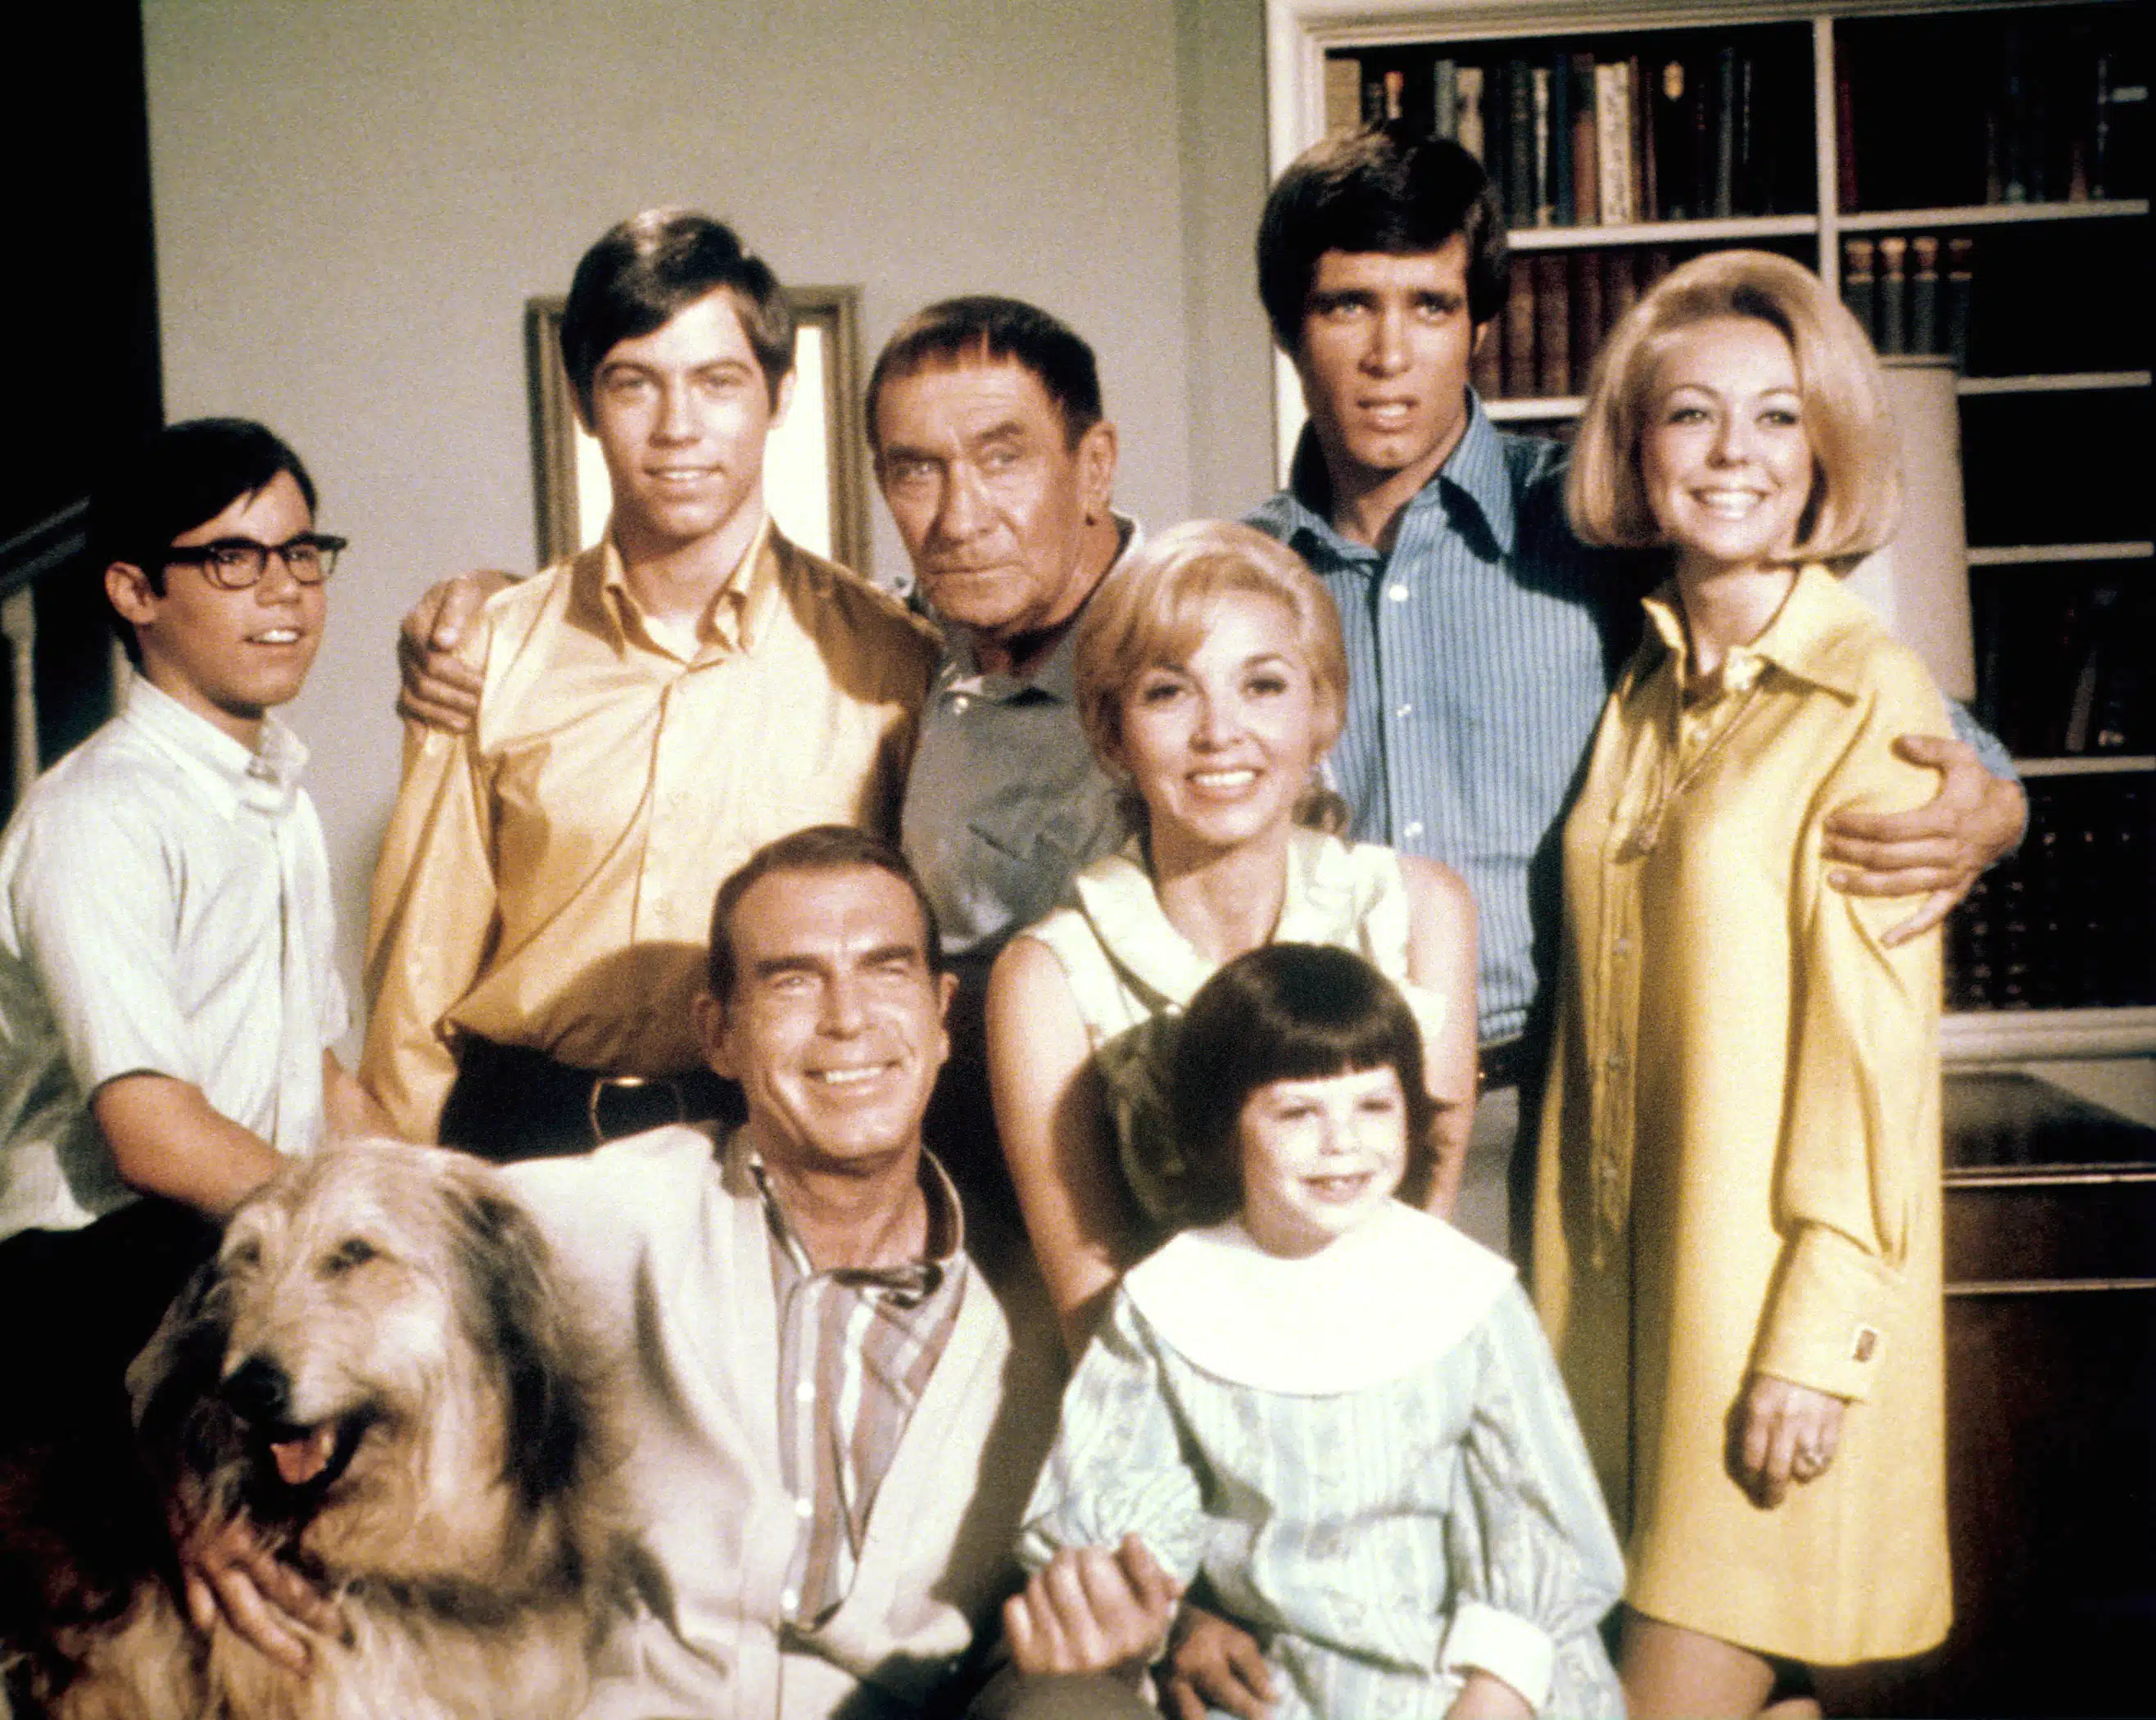 MY THREE SONS, (back, l to r): Barry Livingston, Stanley Livingston, William Demarest, Beverly Garland, Don Grady, Tina Cole, (front): Tramp the dog, Fred MacMurray, Dawn Lyn, 1960-72